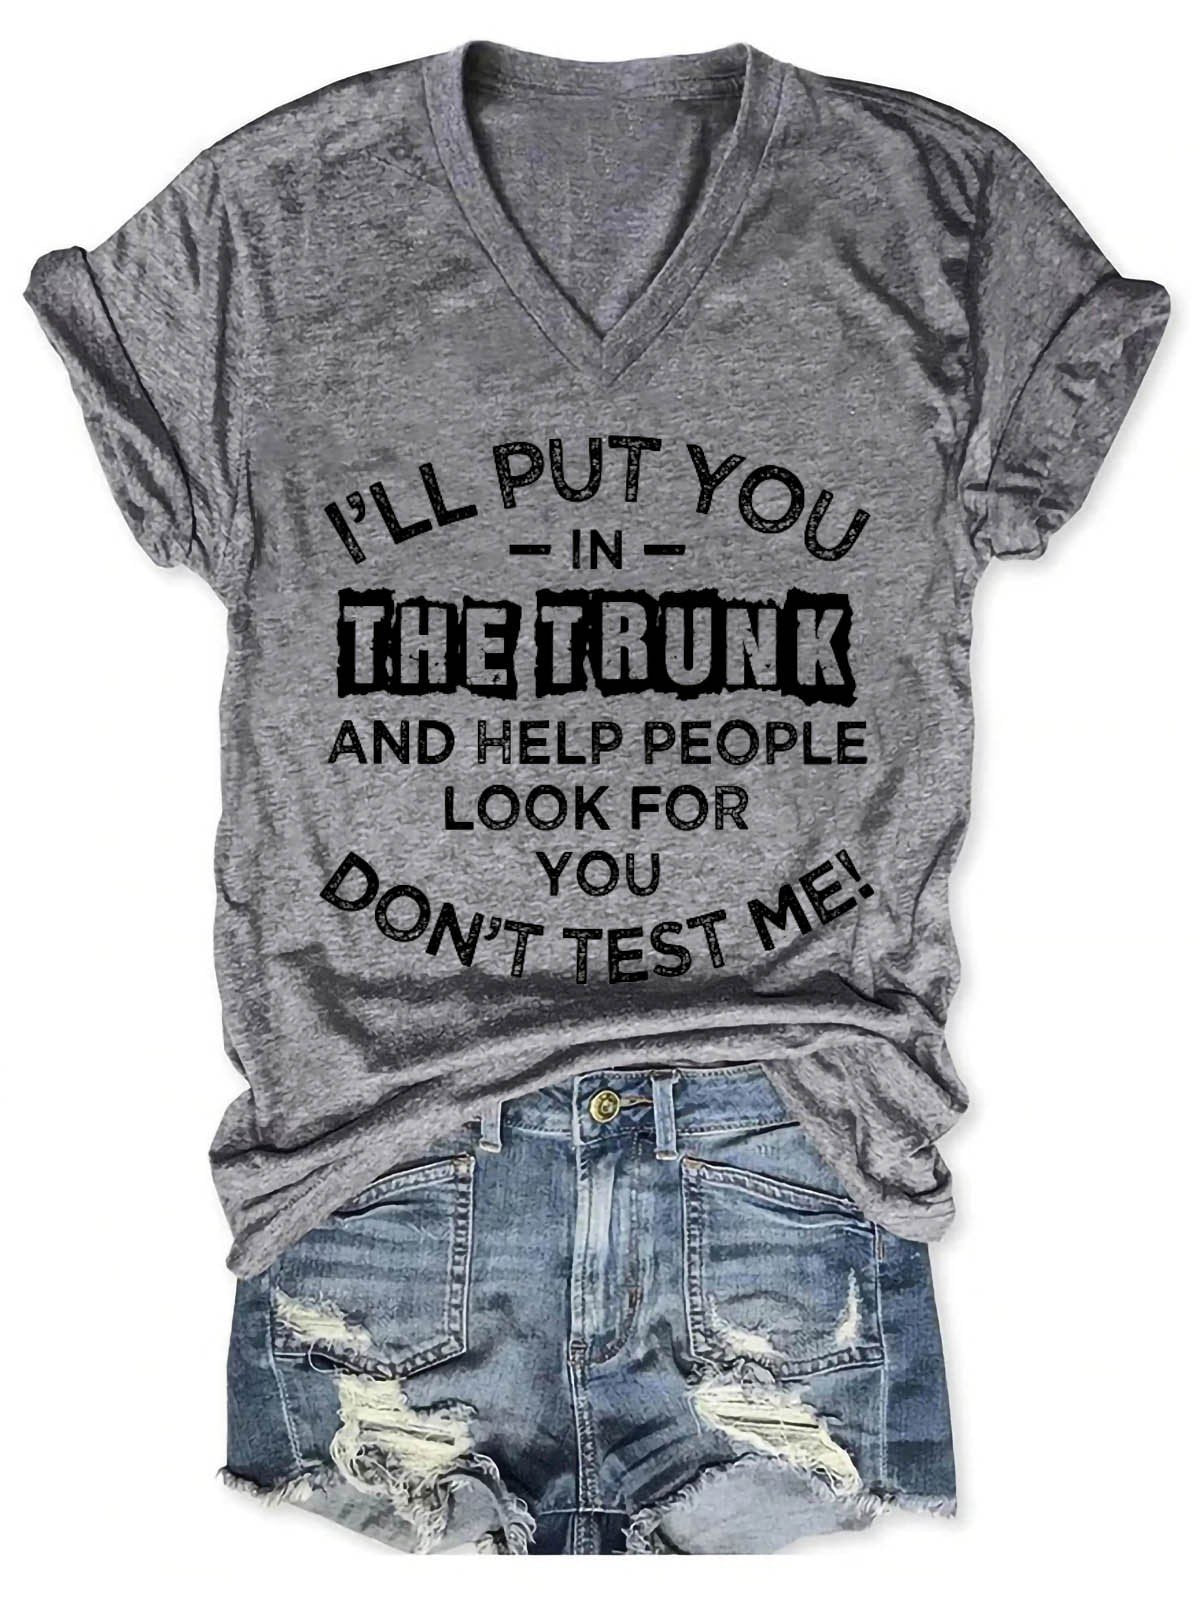 Women's I'll Put You In The Trunk And Help People Look For You Don't Test Me V-Neck T-Shirt - Outlets Forever